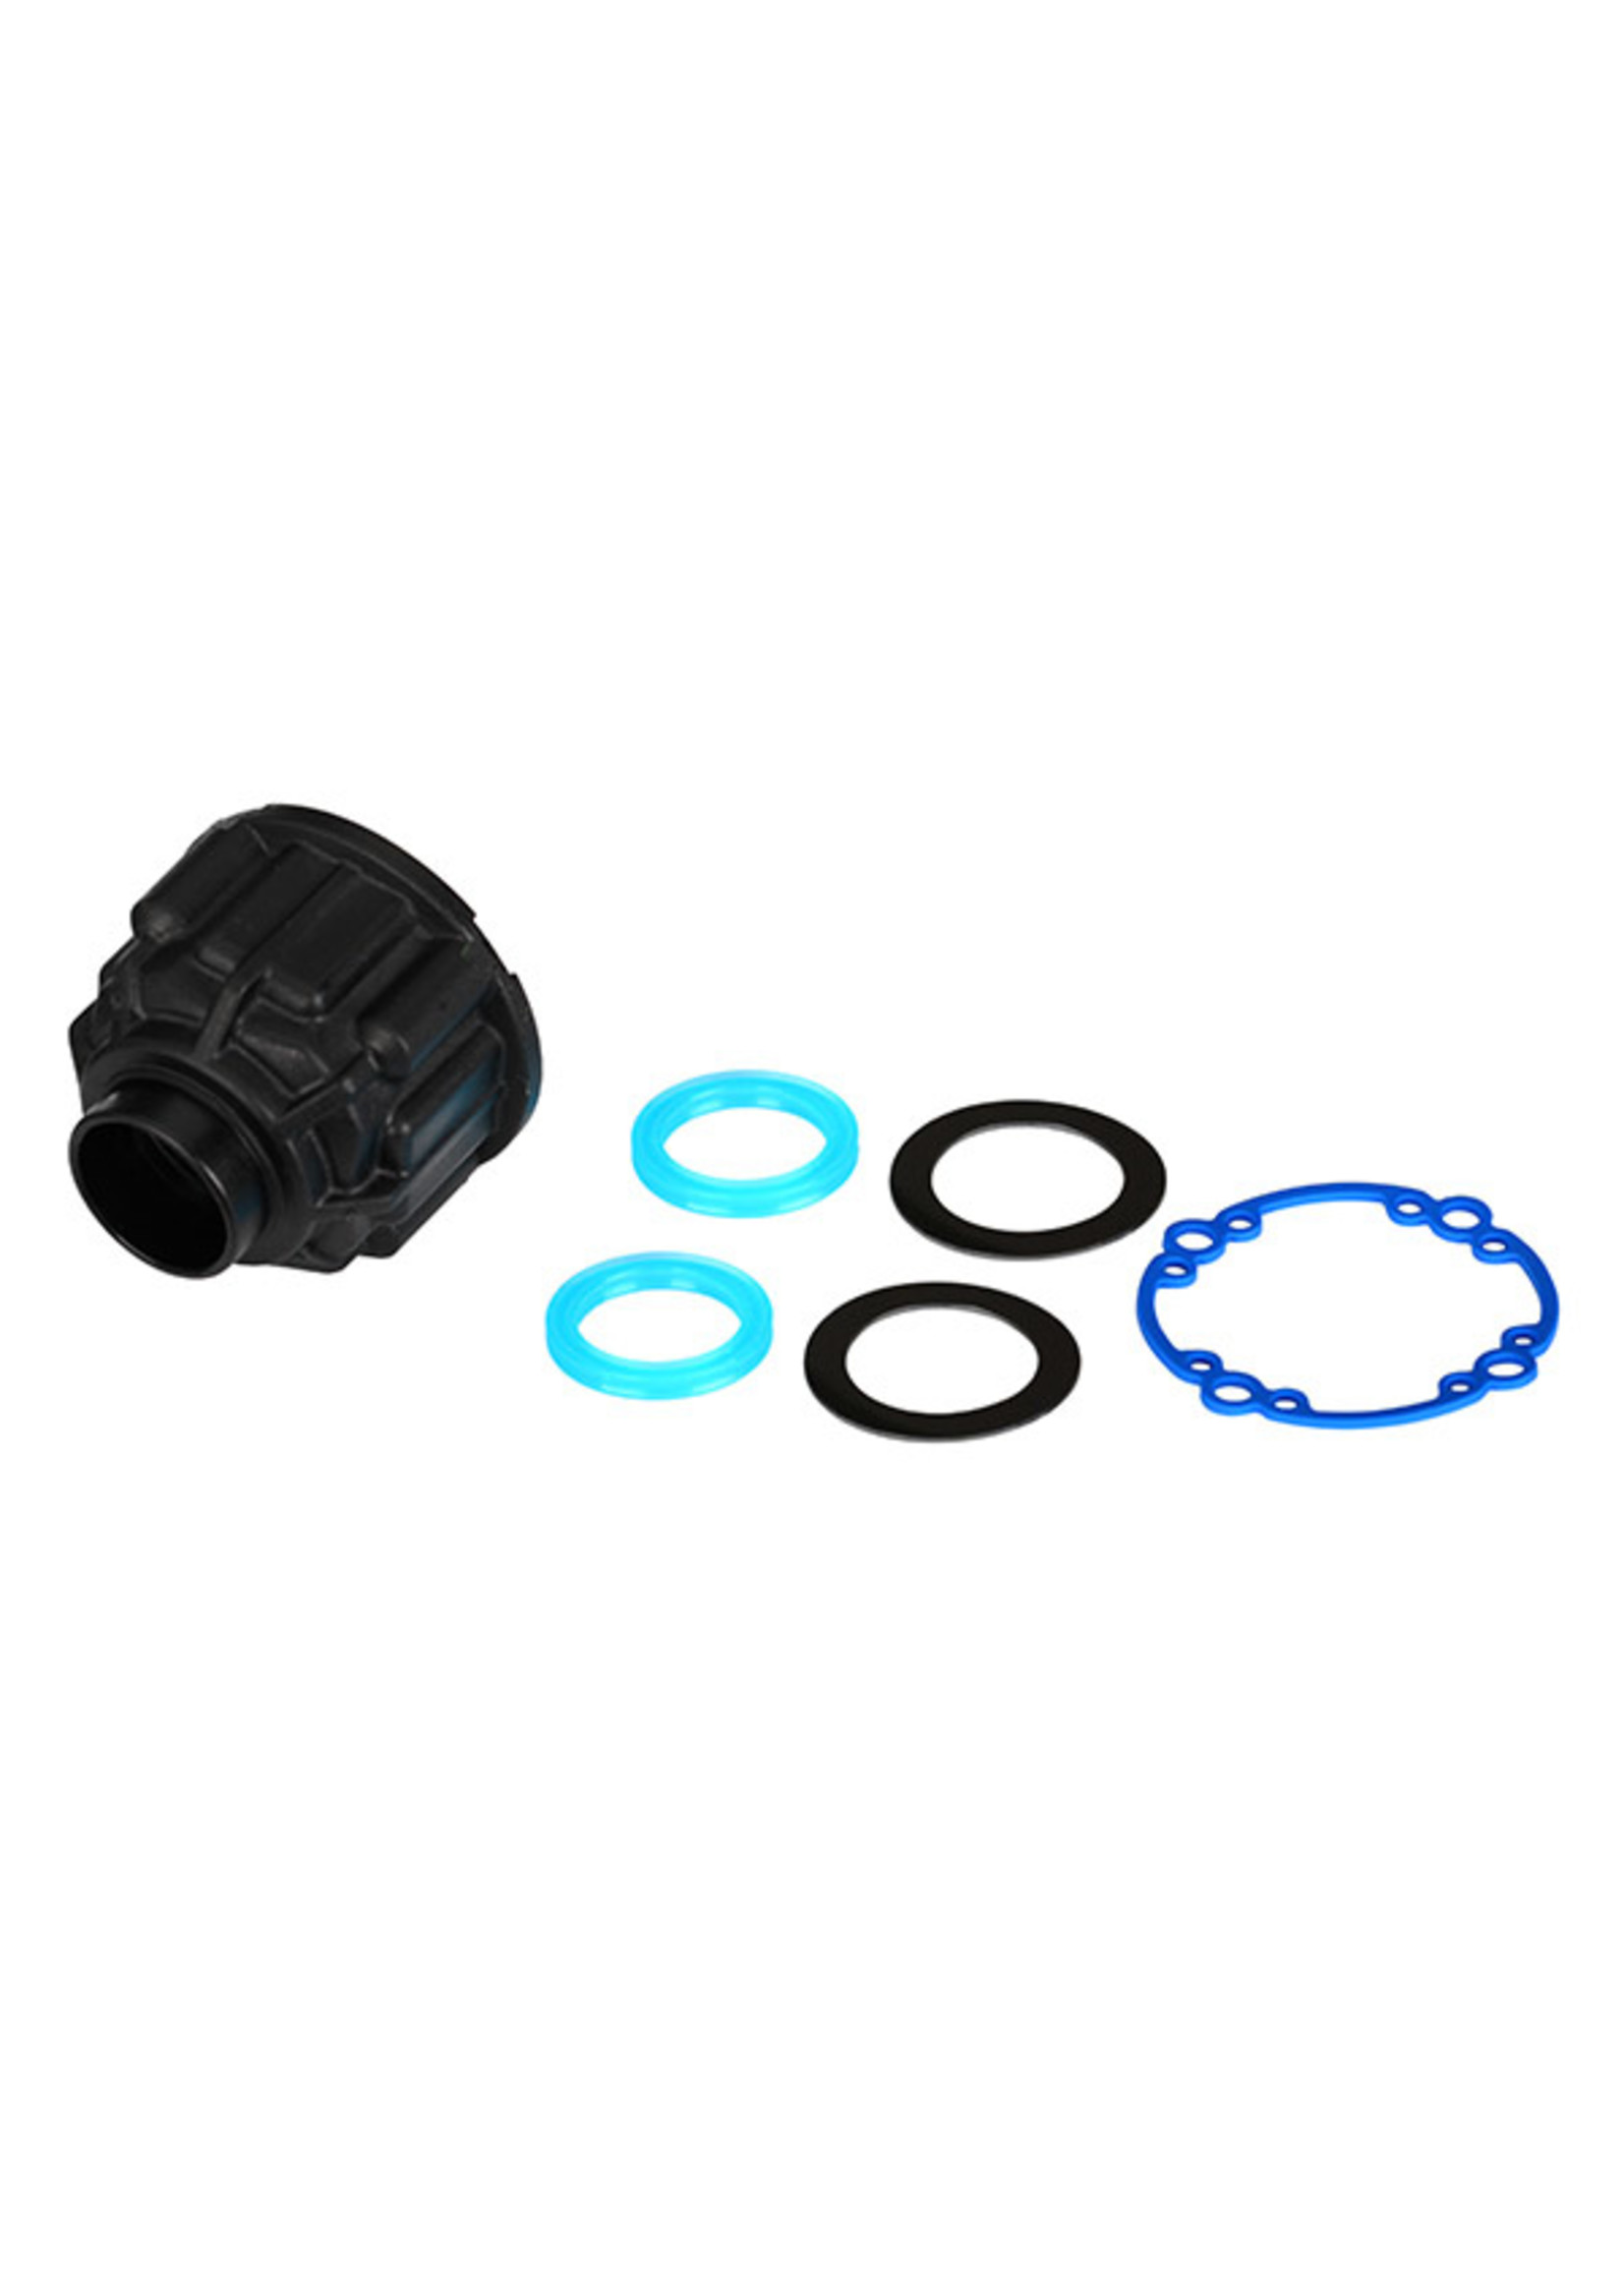 Traxxas 7781 - Carrier Differential, X-Ring Gaskets